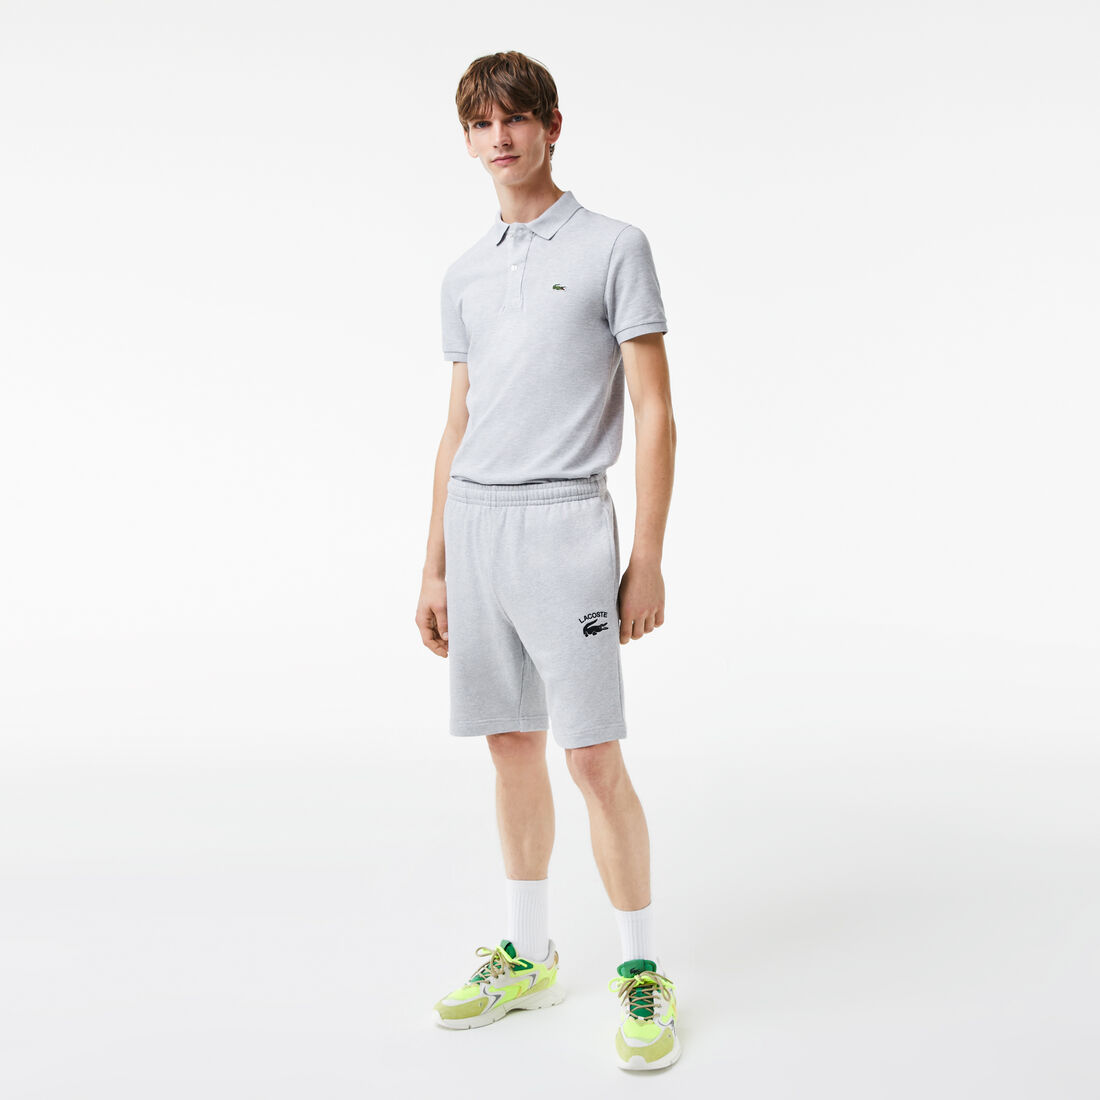 Men's Lacoste Embroidery Shorts